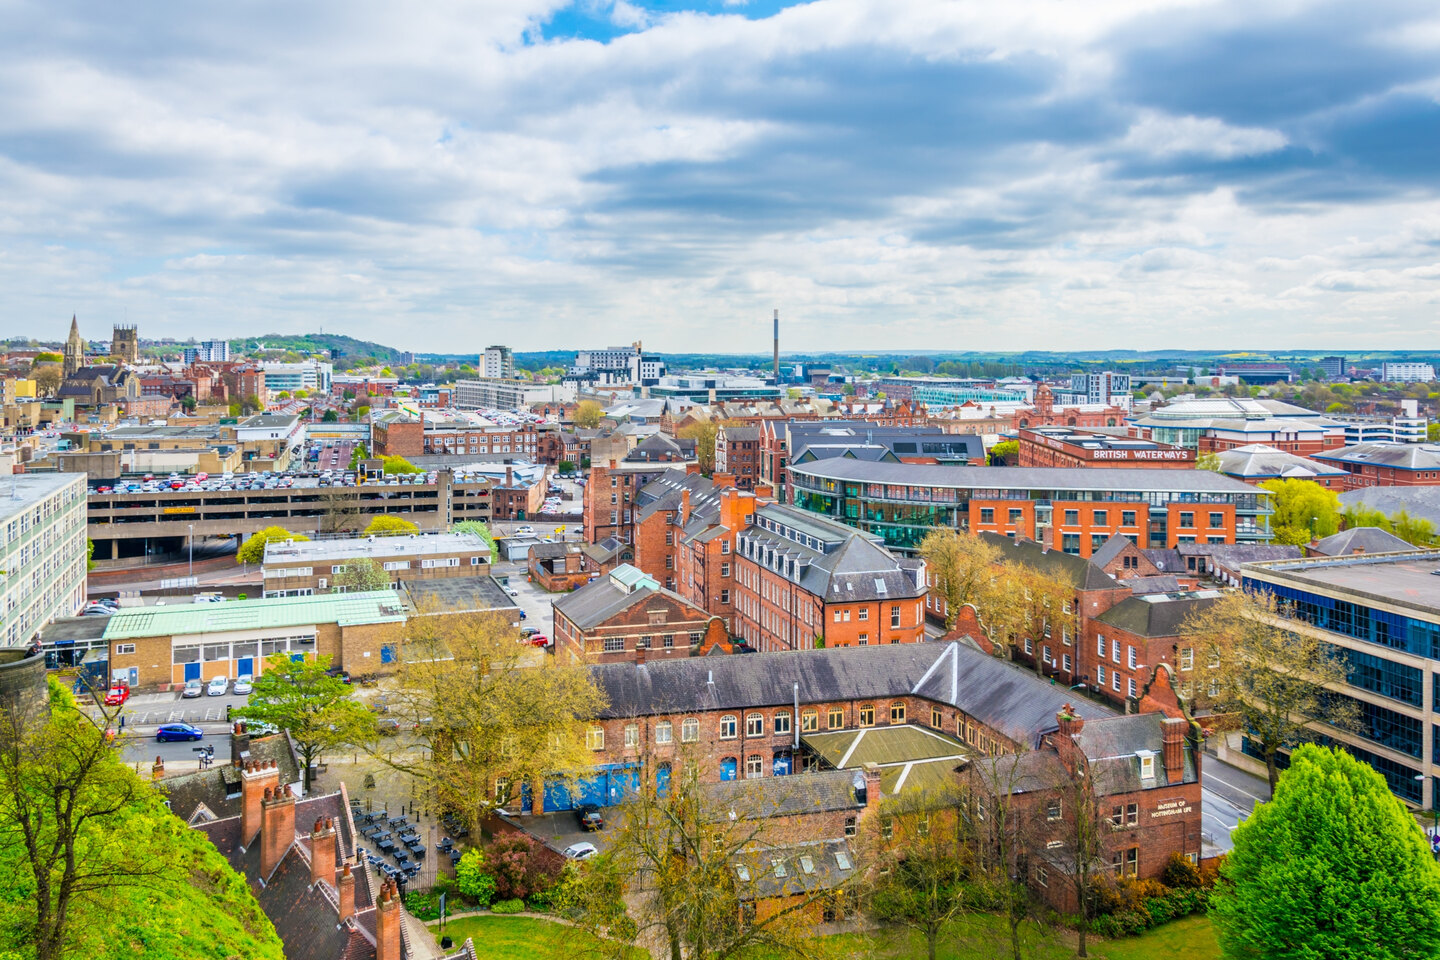 Student Accommodation in Carlton, Nottingham - The Carlton skyline with a view of Nottingham